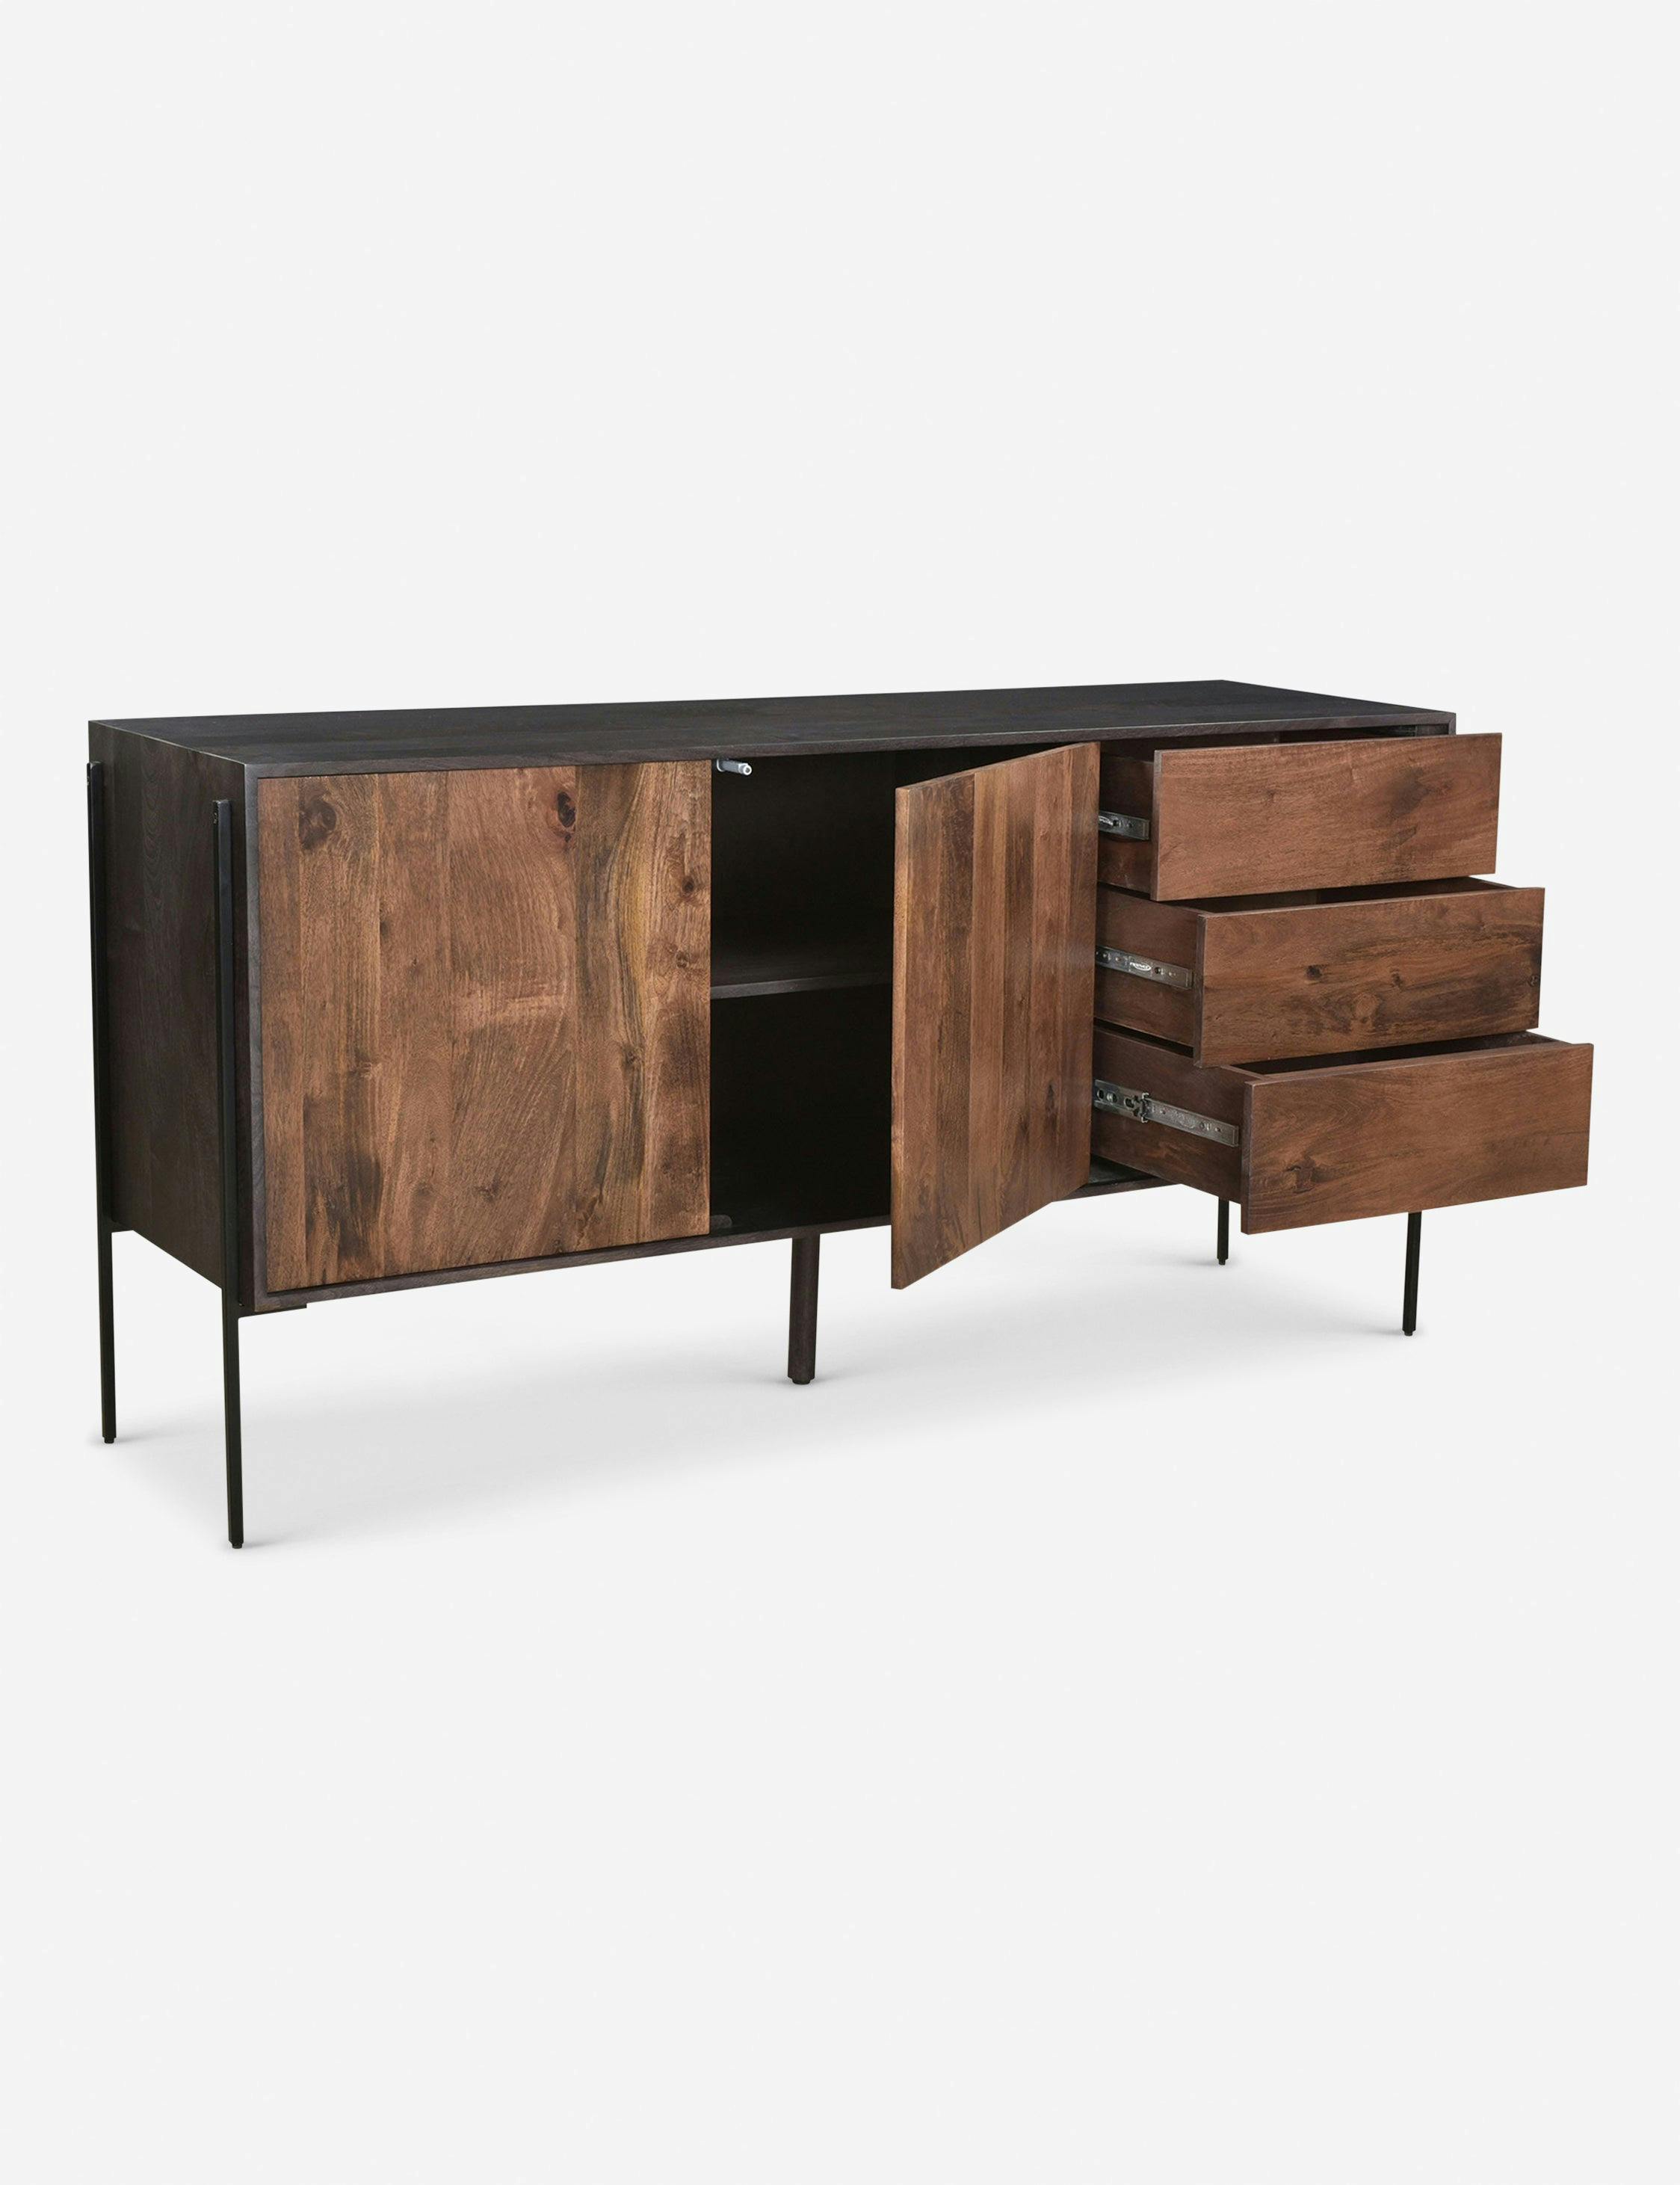 Brianna Light Brown Mango Wood Sideboard with Iron Accents